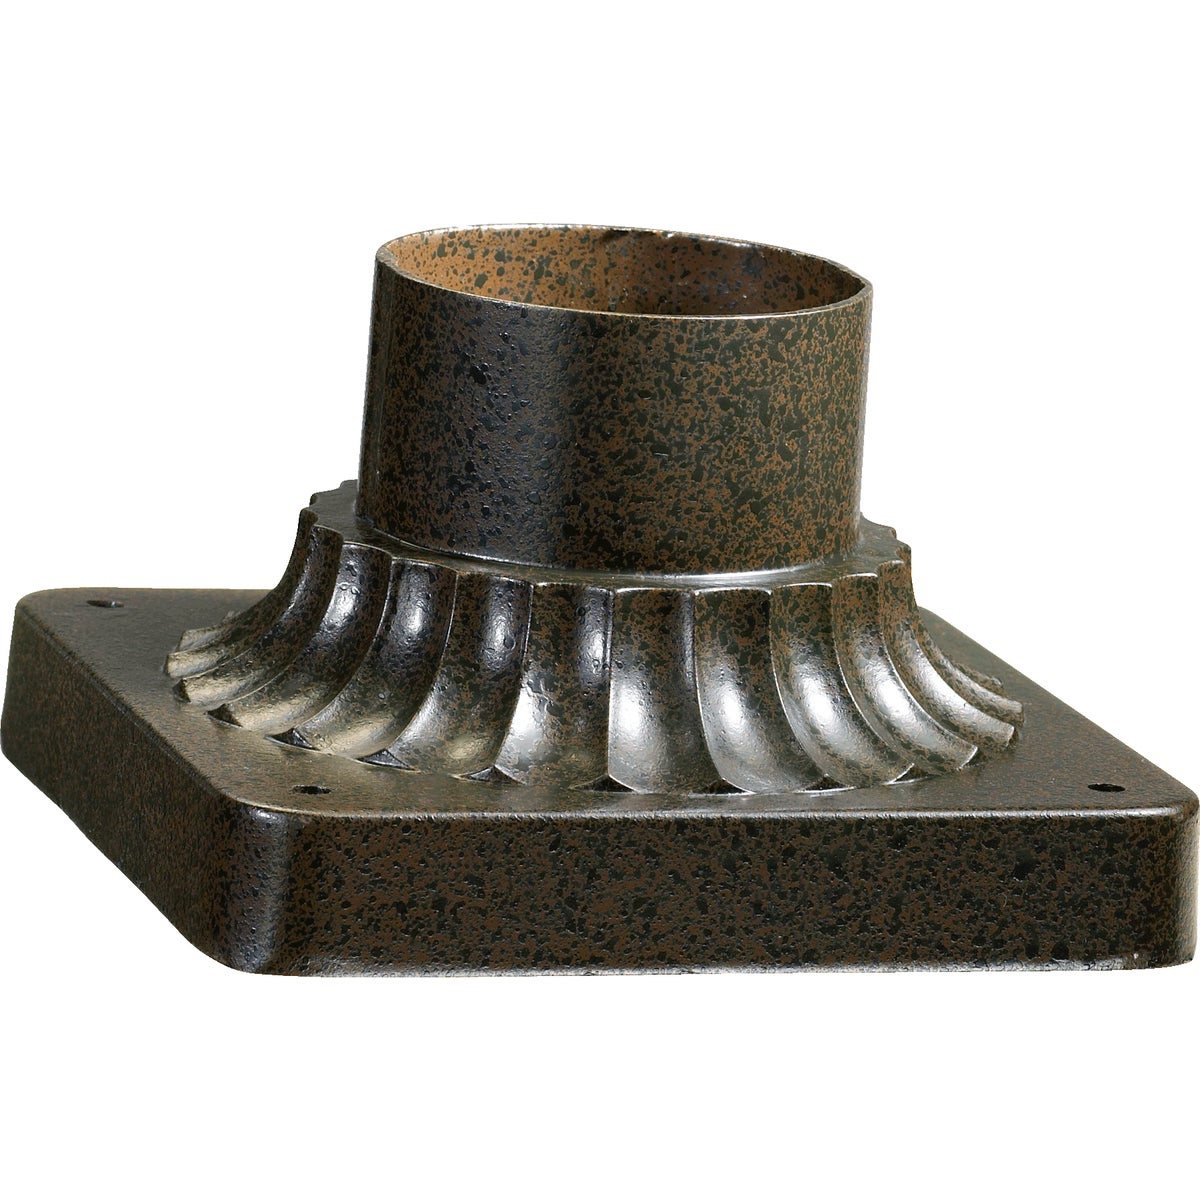 Outdoor Pier Mount with ornate metal work for outdoor post lighting fixtures. UL Listed for wet locations. Graphite, Noir, or Oiled Bronze finish. 5.75"W x 5.75"L x 3.25"H.